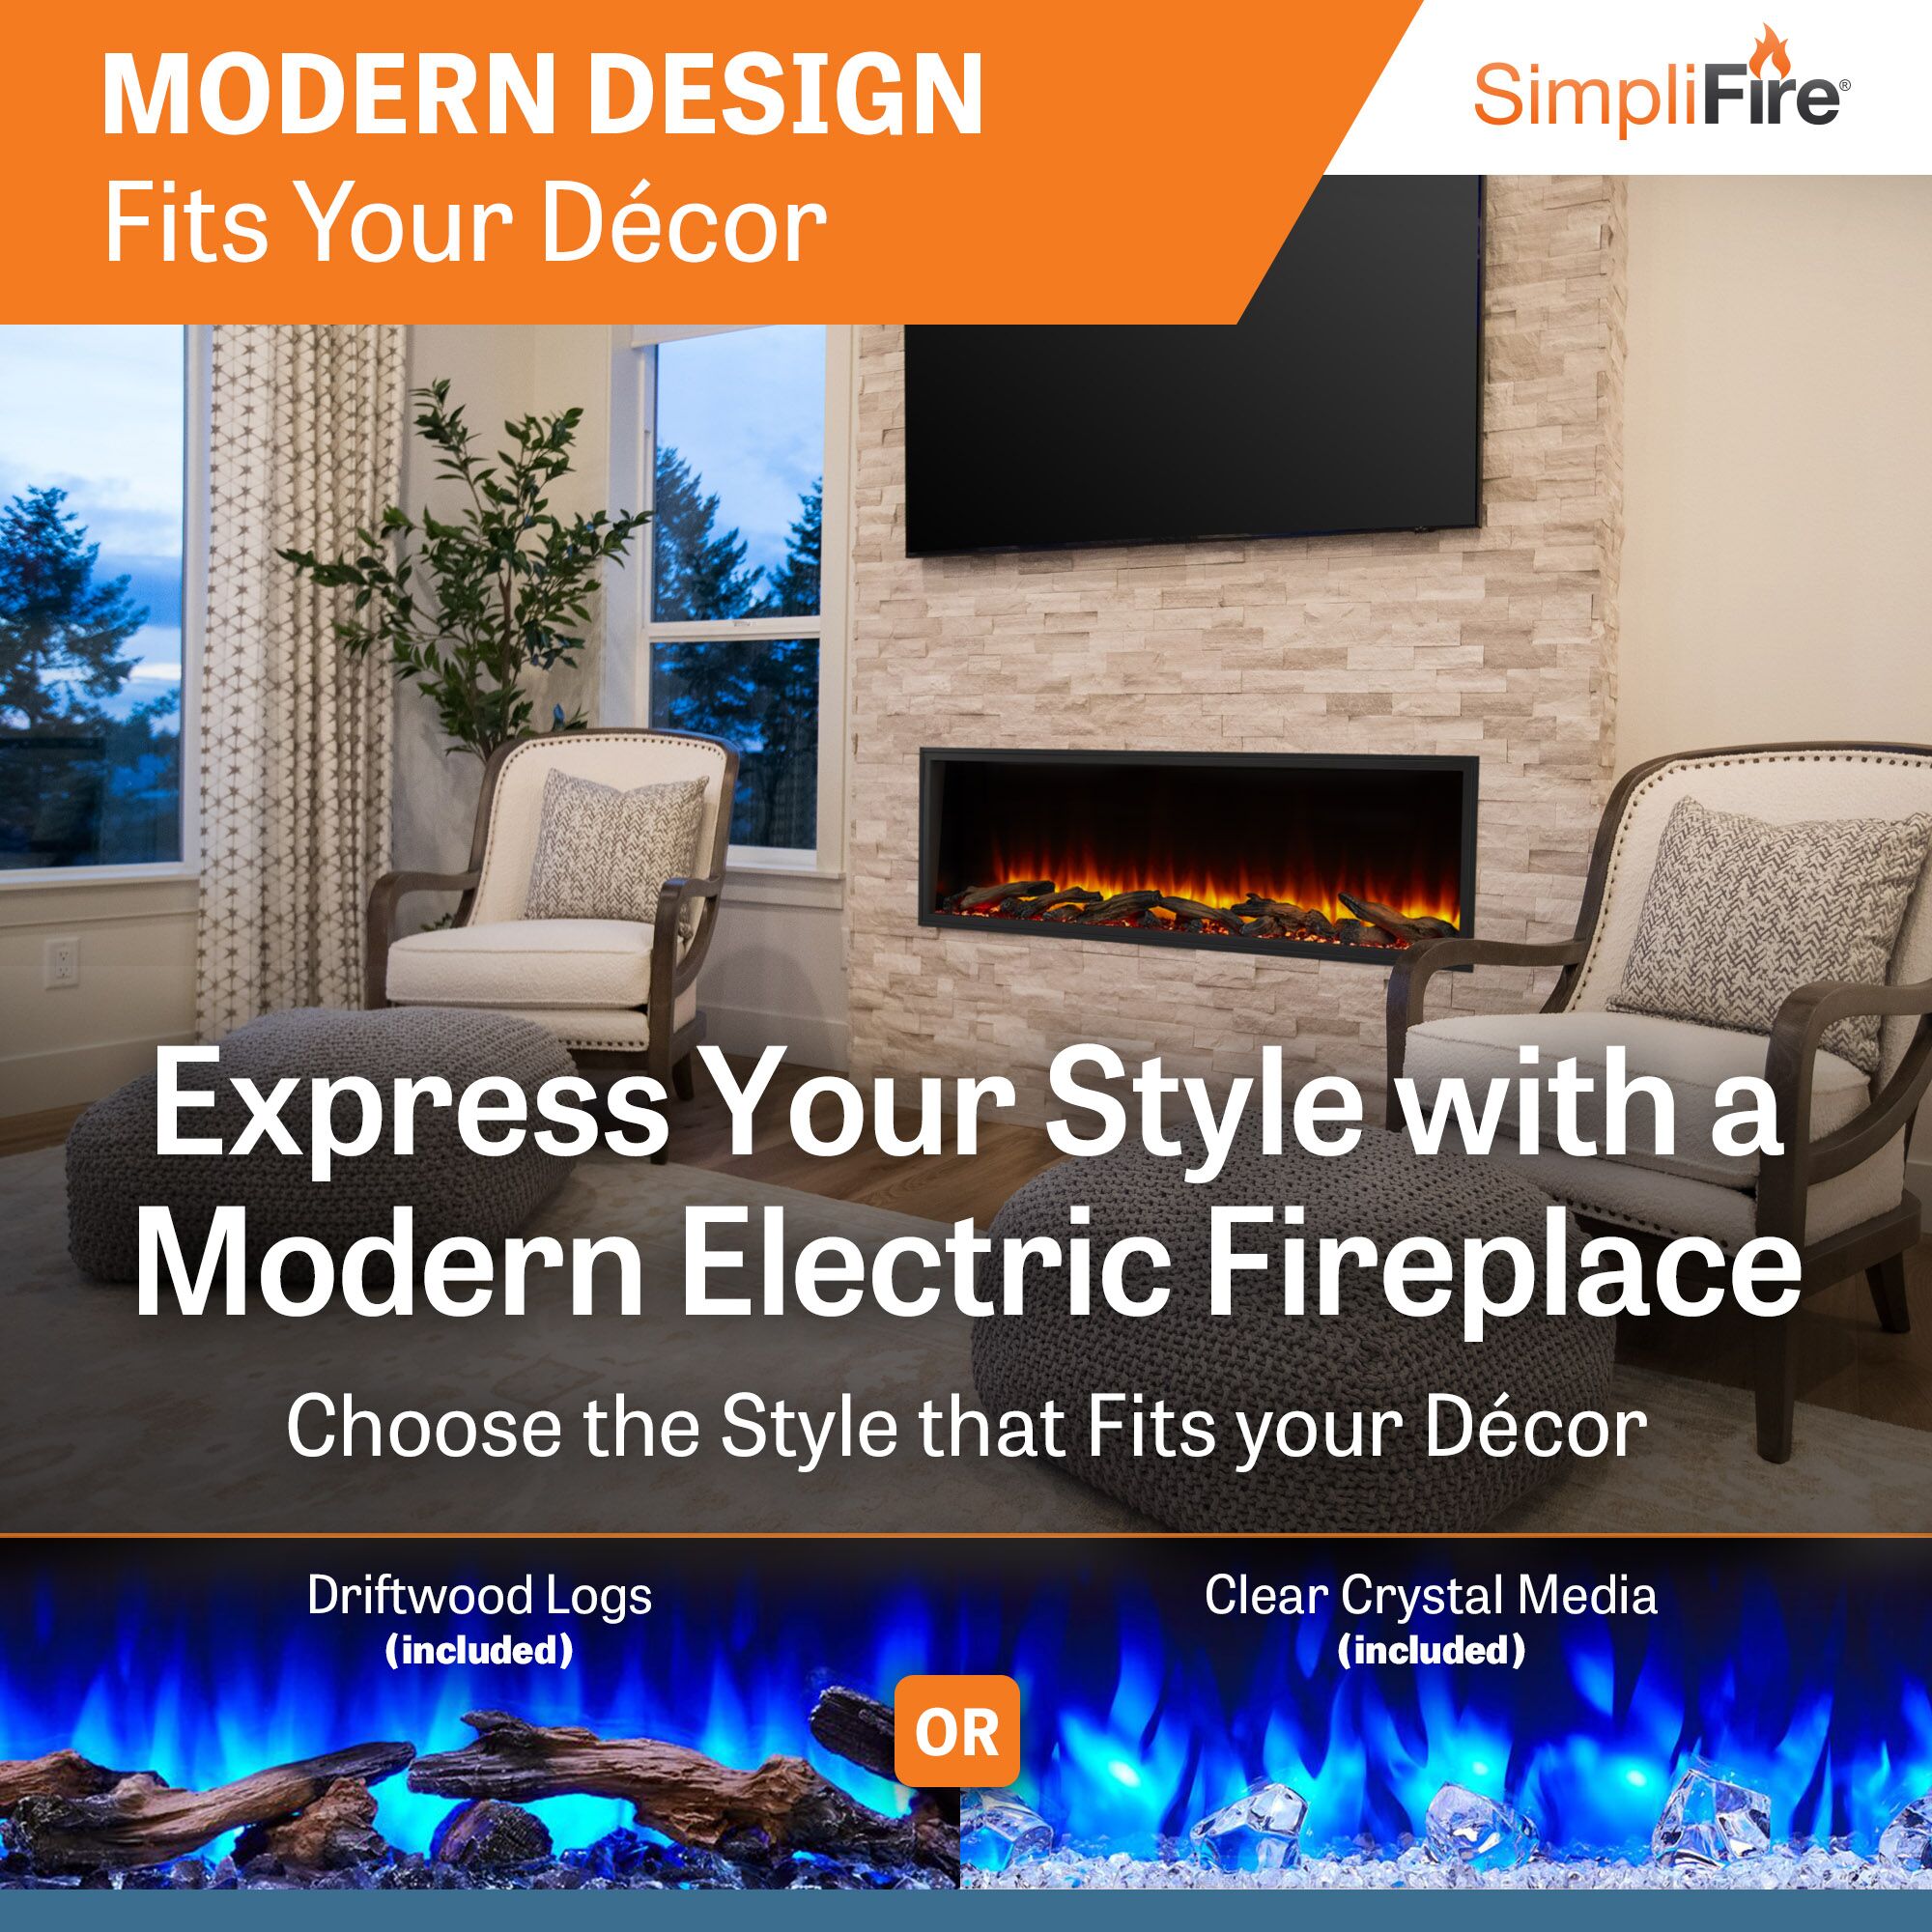 55 inch scion electric fireplace thumbnail image